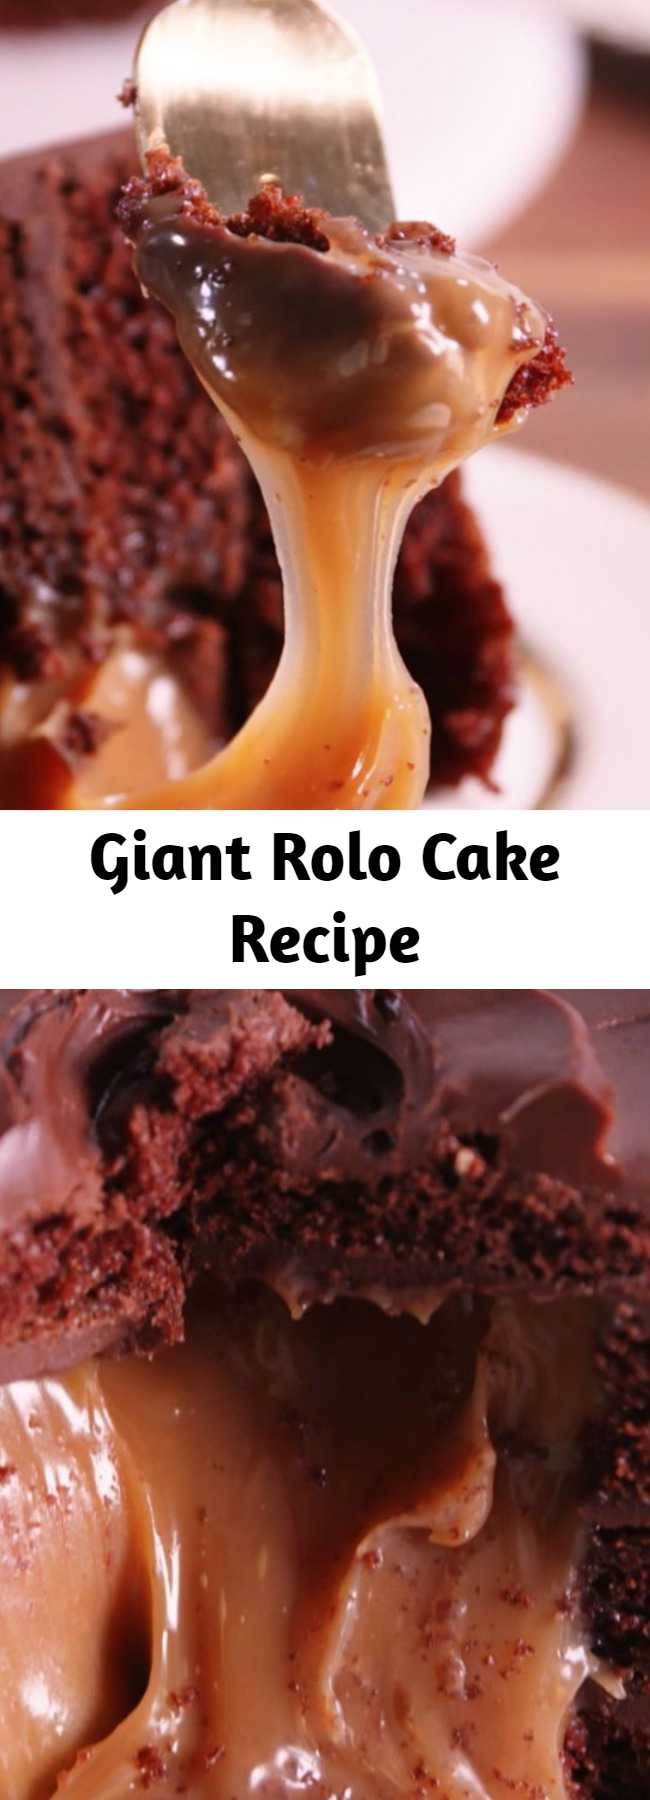 Giant Rolo Cake Recipe - Rolo lovers, try not to freak out when you see this cake.